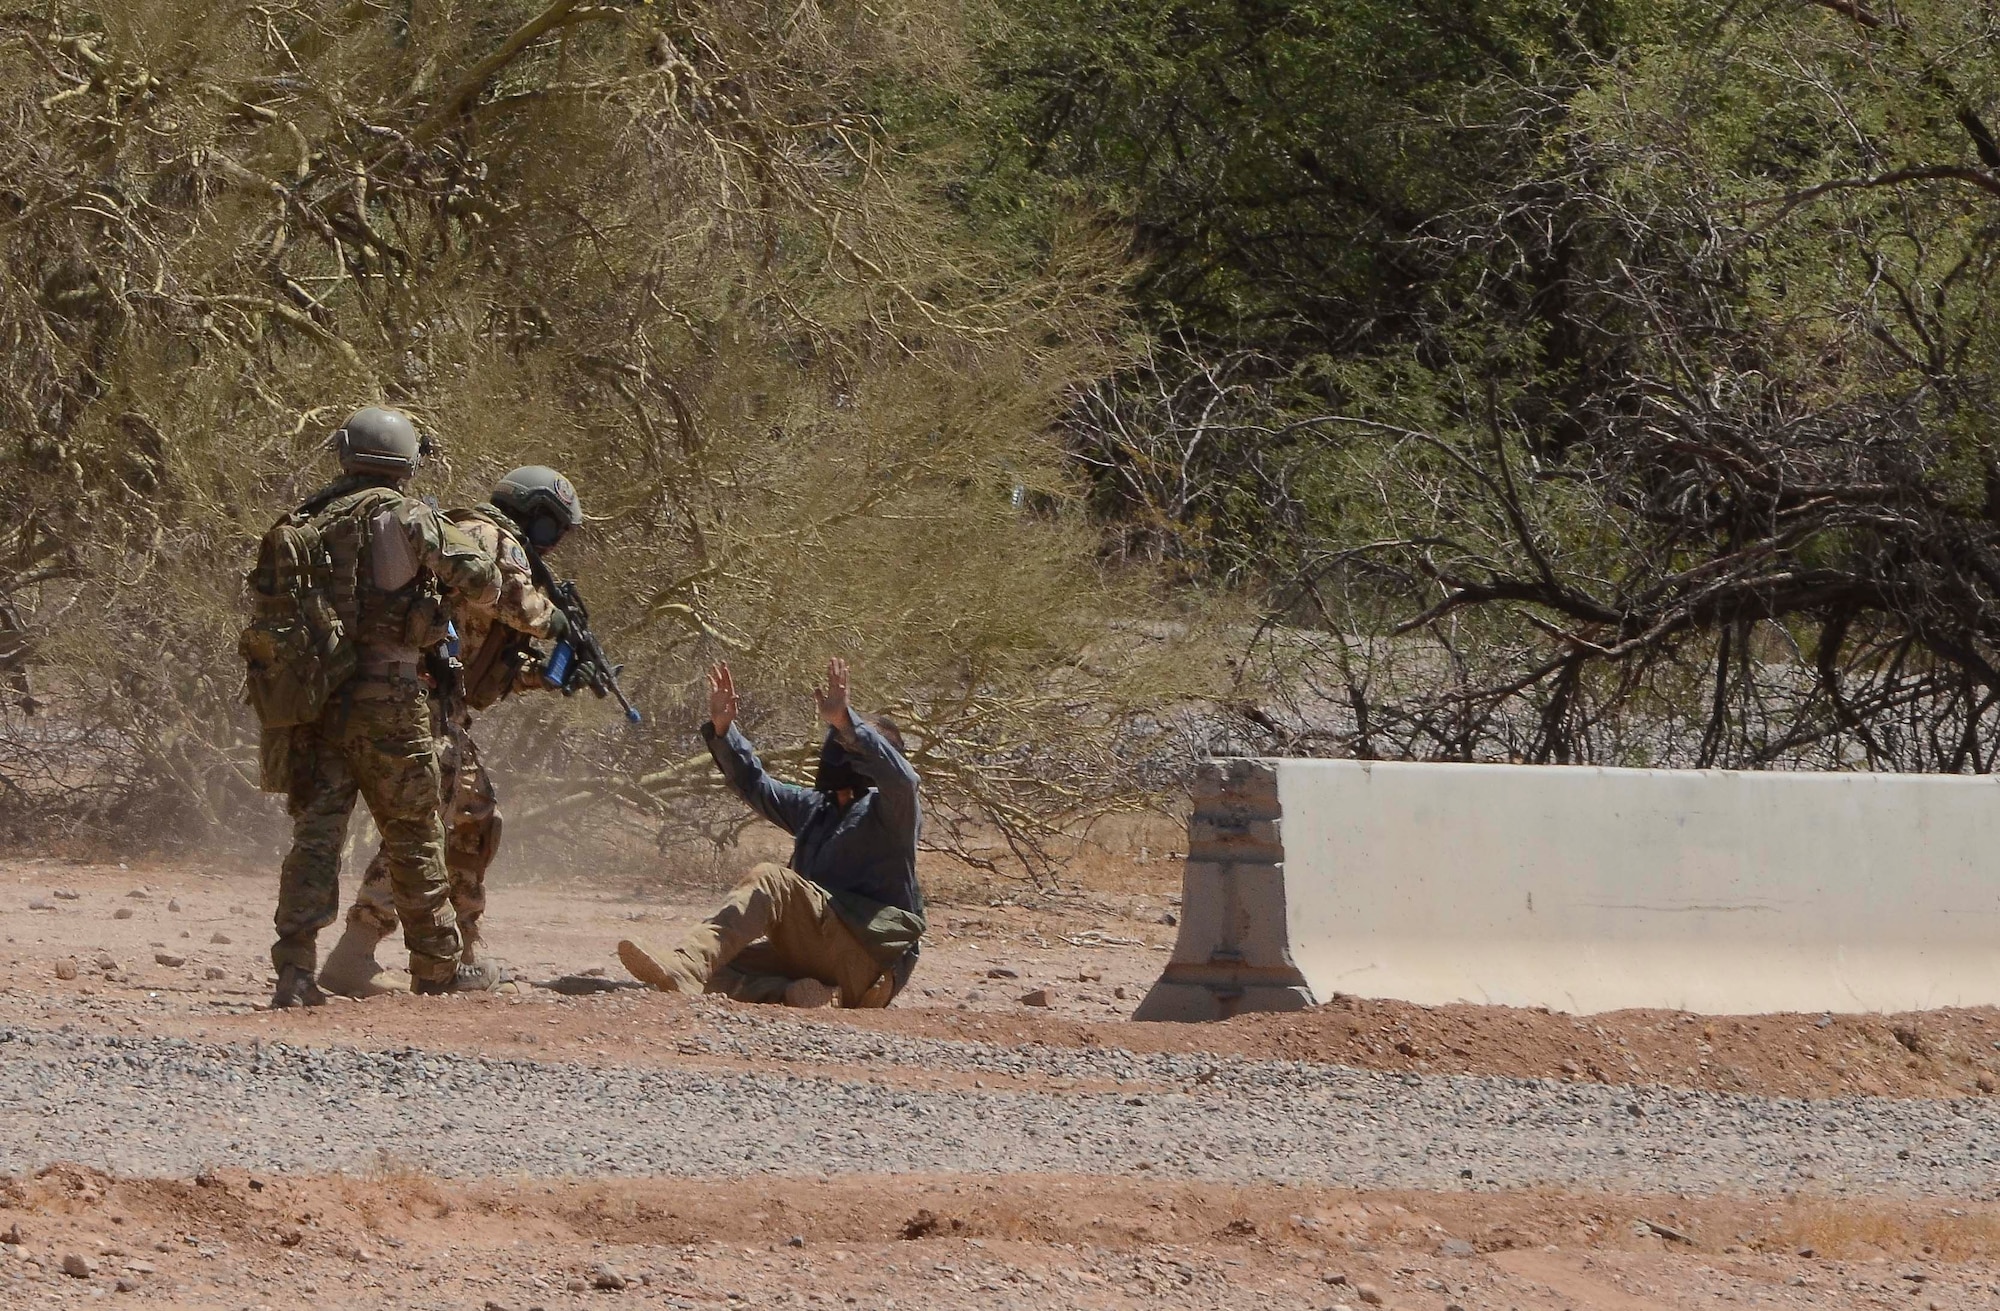 A Combat Search and Rescue team capture an opposition force member at training site during a training mission in Exercise ANGEL THUNDER on May 16, 2014 at the Florence Military Reservation, Ariz. ANGEL THUNDER 2014 is the largest and most realistic joint service, multinational, interagency combat search and rescue exercise designed to provide training for personnel recovery assets using a variety of scenarios to simulate deployment conditions and contingencies. Personnel recovery forces will train through the full spectrum of personnel recovery capabilities with ground recovery personnel, air assets, and interagency teams. (U.S. Air Force photo by Staff Sgt. Adam Grant/Released)